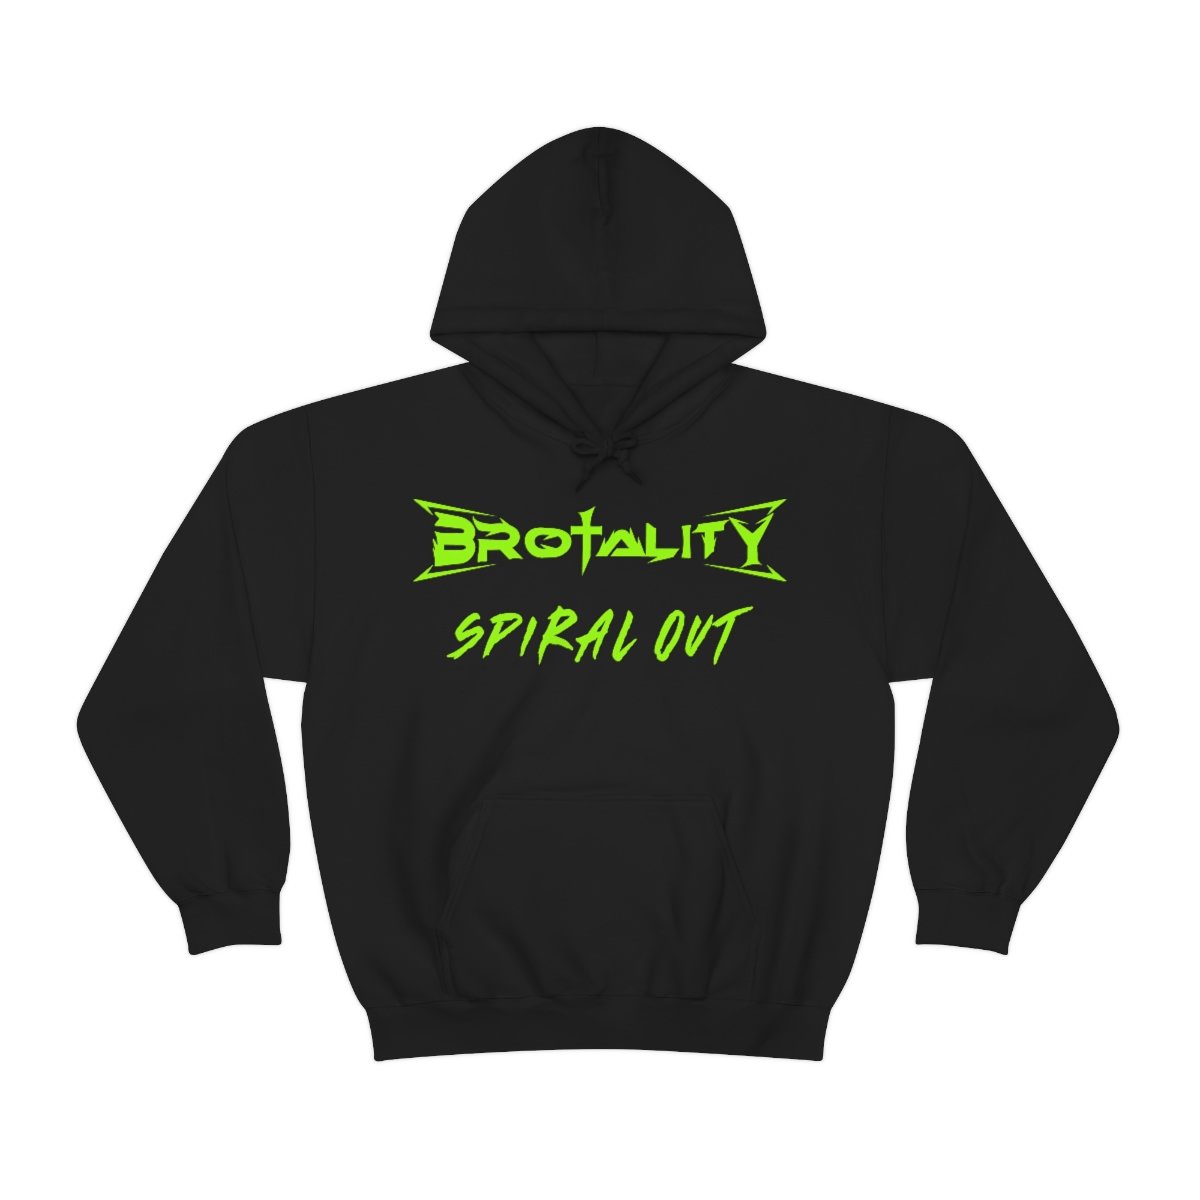 Brotality Spiral Out Logo Pullover Hooded Sweatshirt